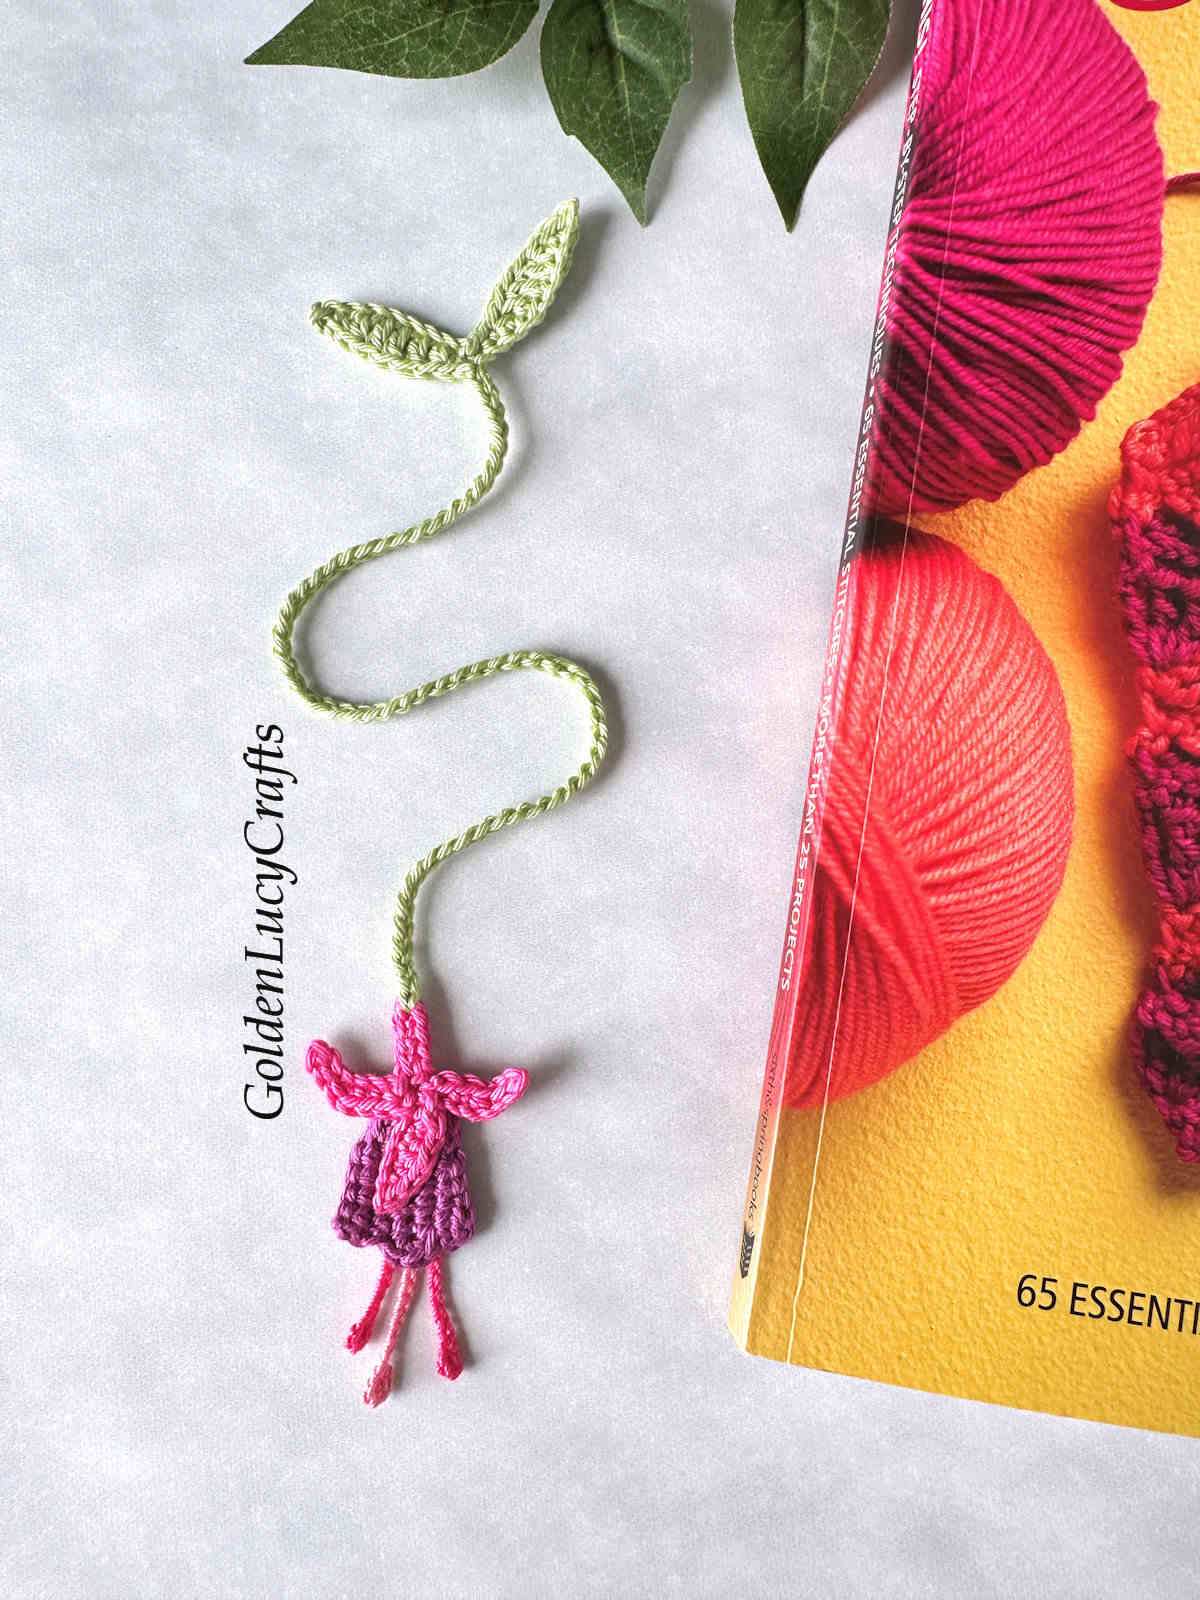 Crocheted fuchsia bookmark laying next to the book.